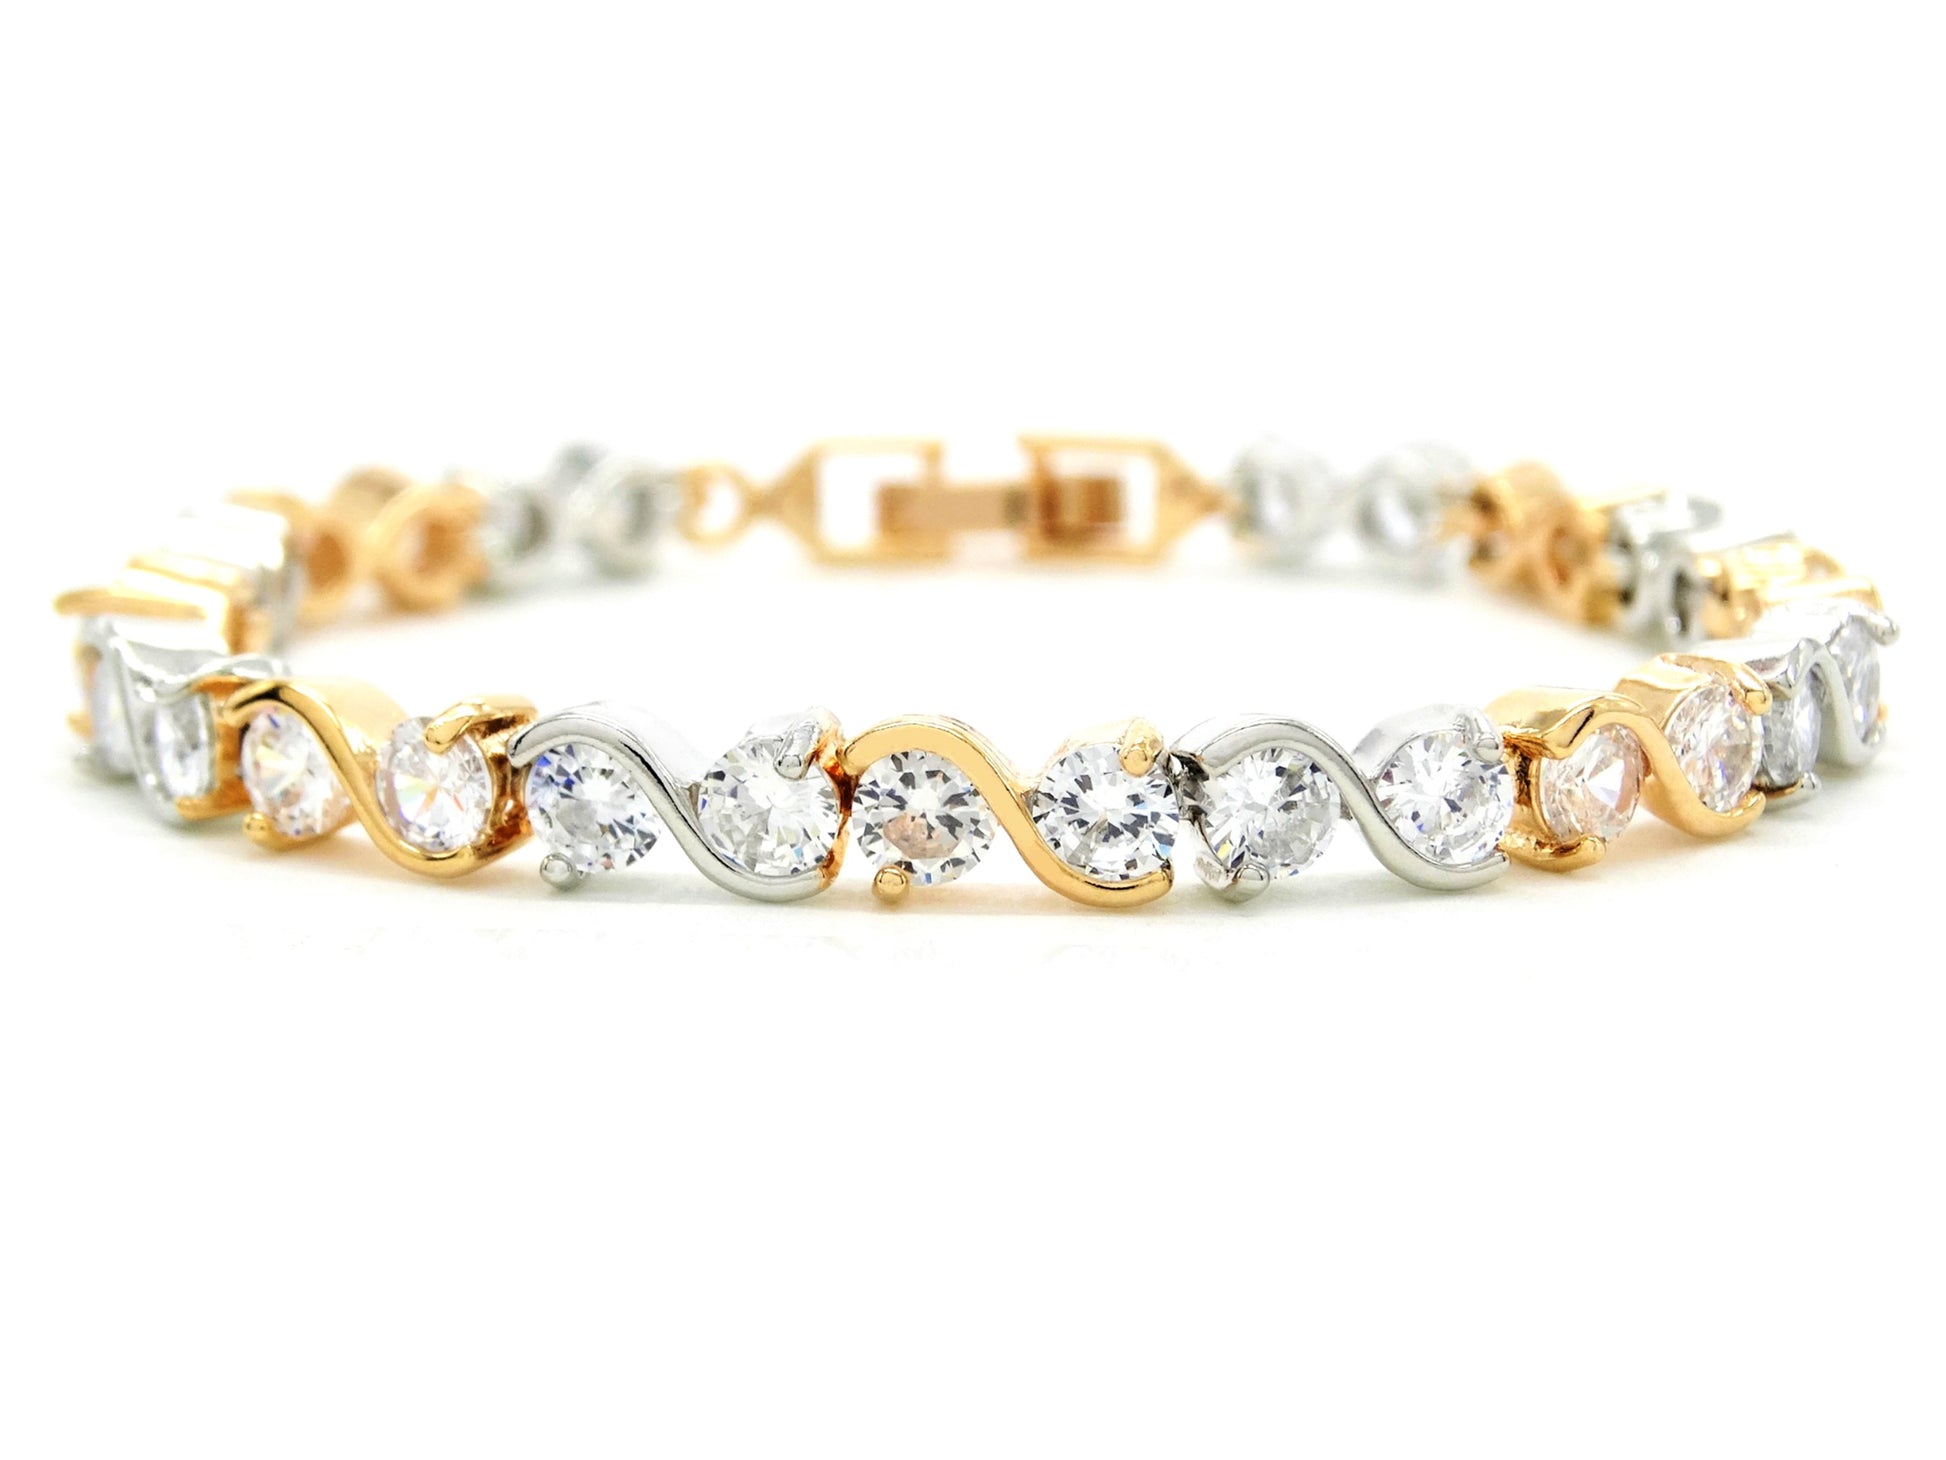 Yellow and white gold gems bracelet MAIN